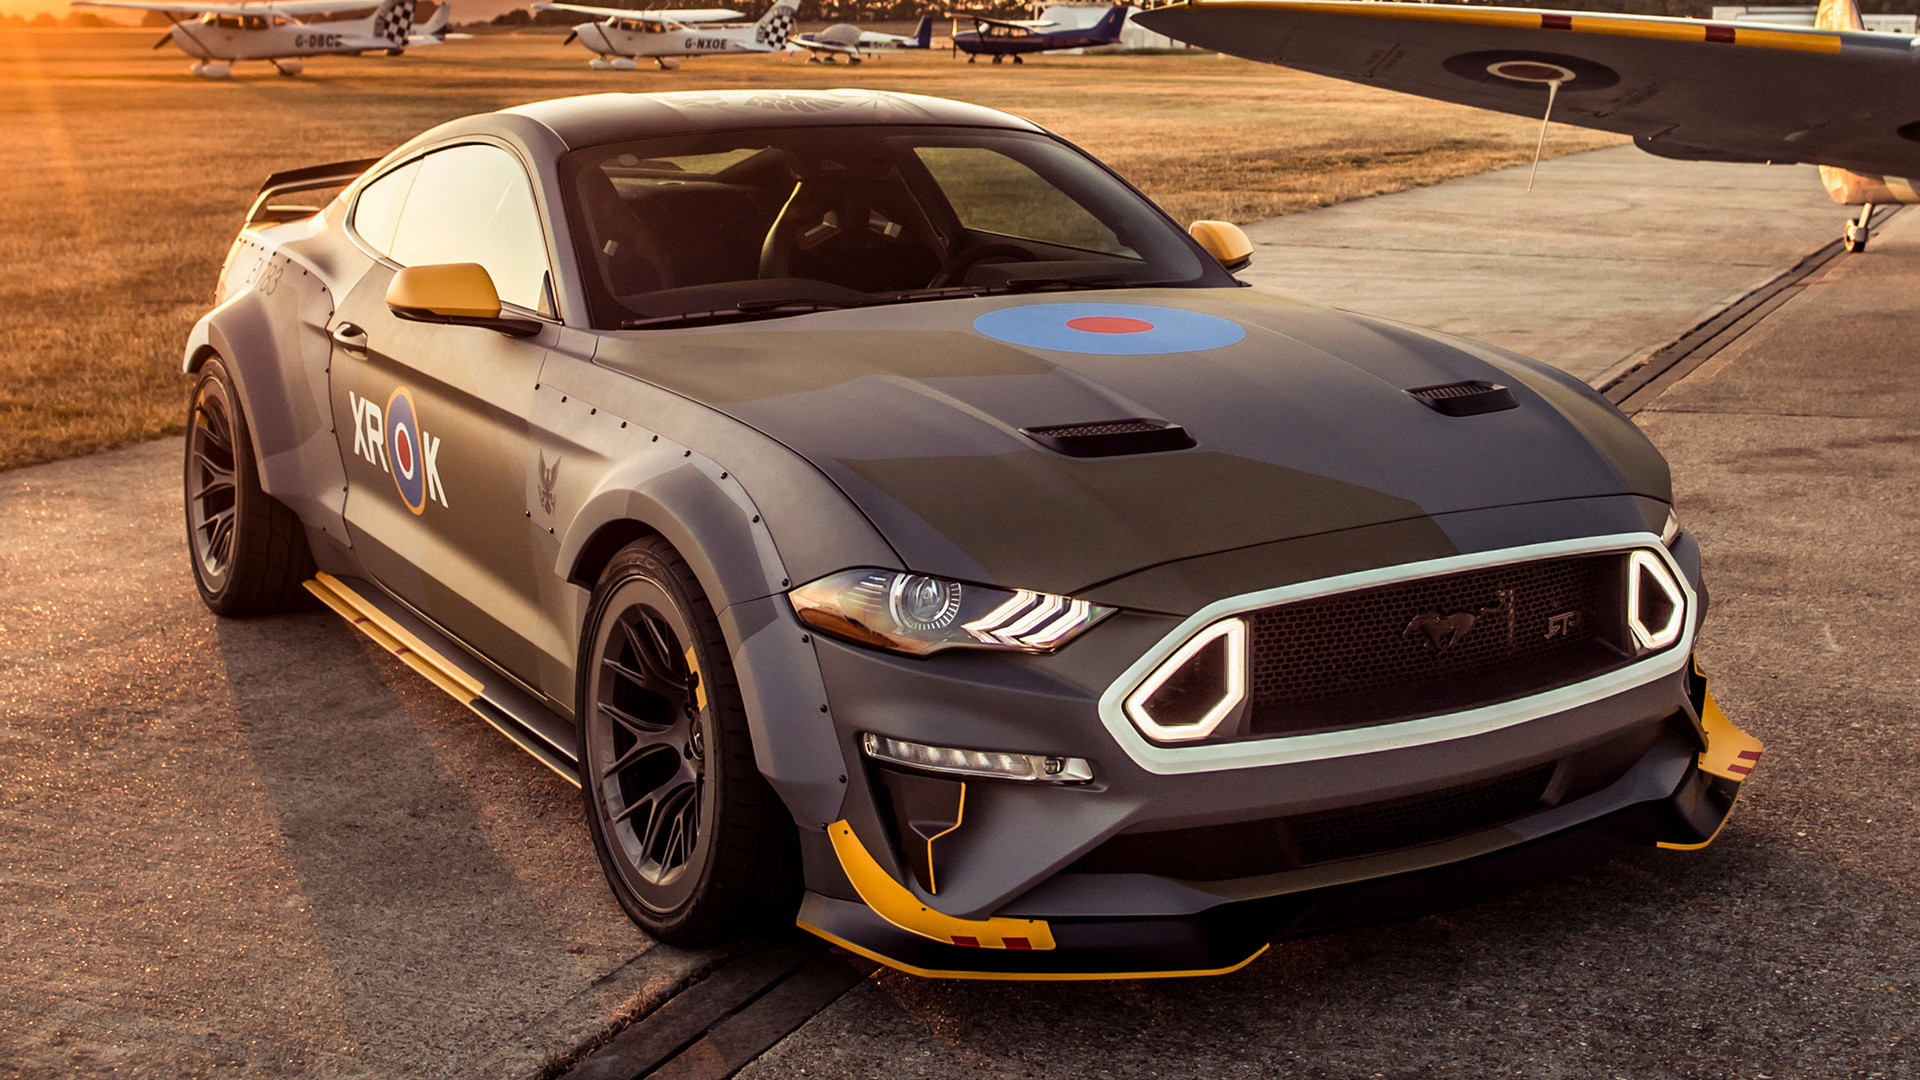 1920x1080 2018 Ford Eagle Squadron Mustang GT HD Wallpaper | Hintergrund |   | ID:935070 - Wallpaper Abyss